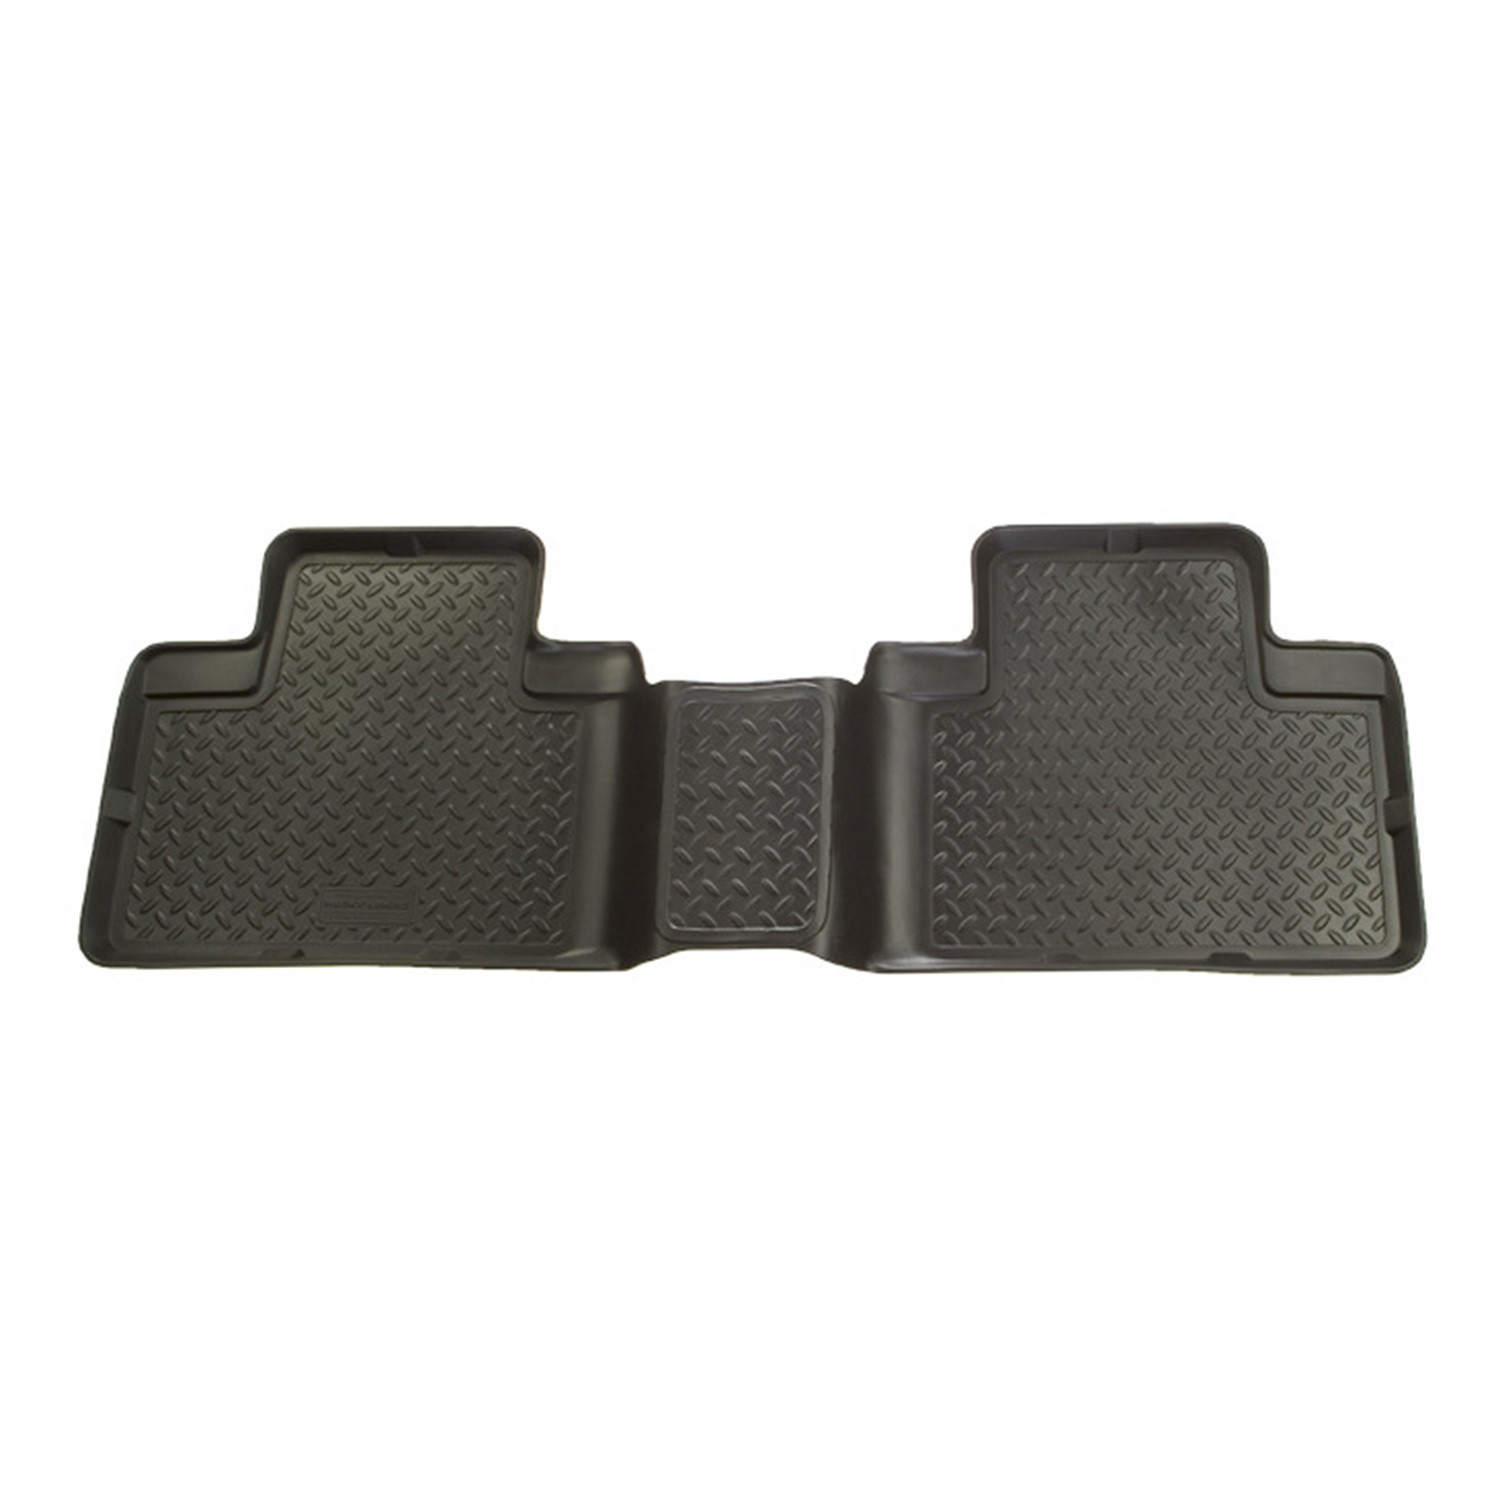 Husky Liners Husky Liners 65471 Classic Style; Floor Liner Fits 12-15 Tacoma